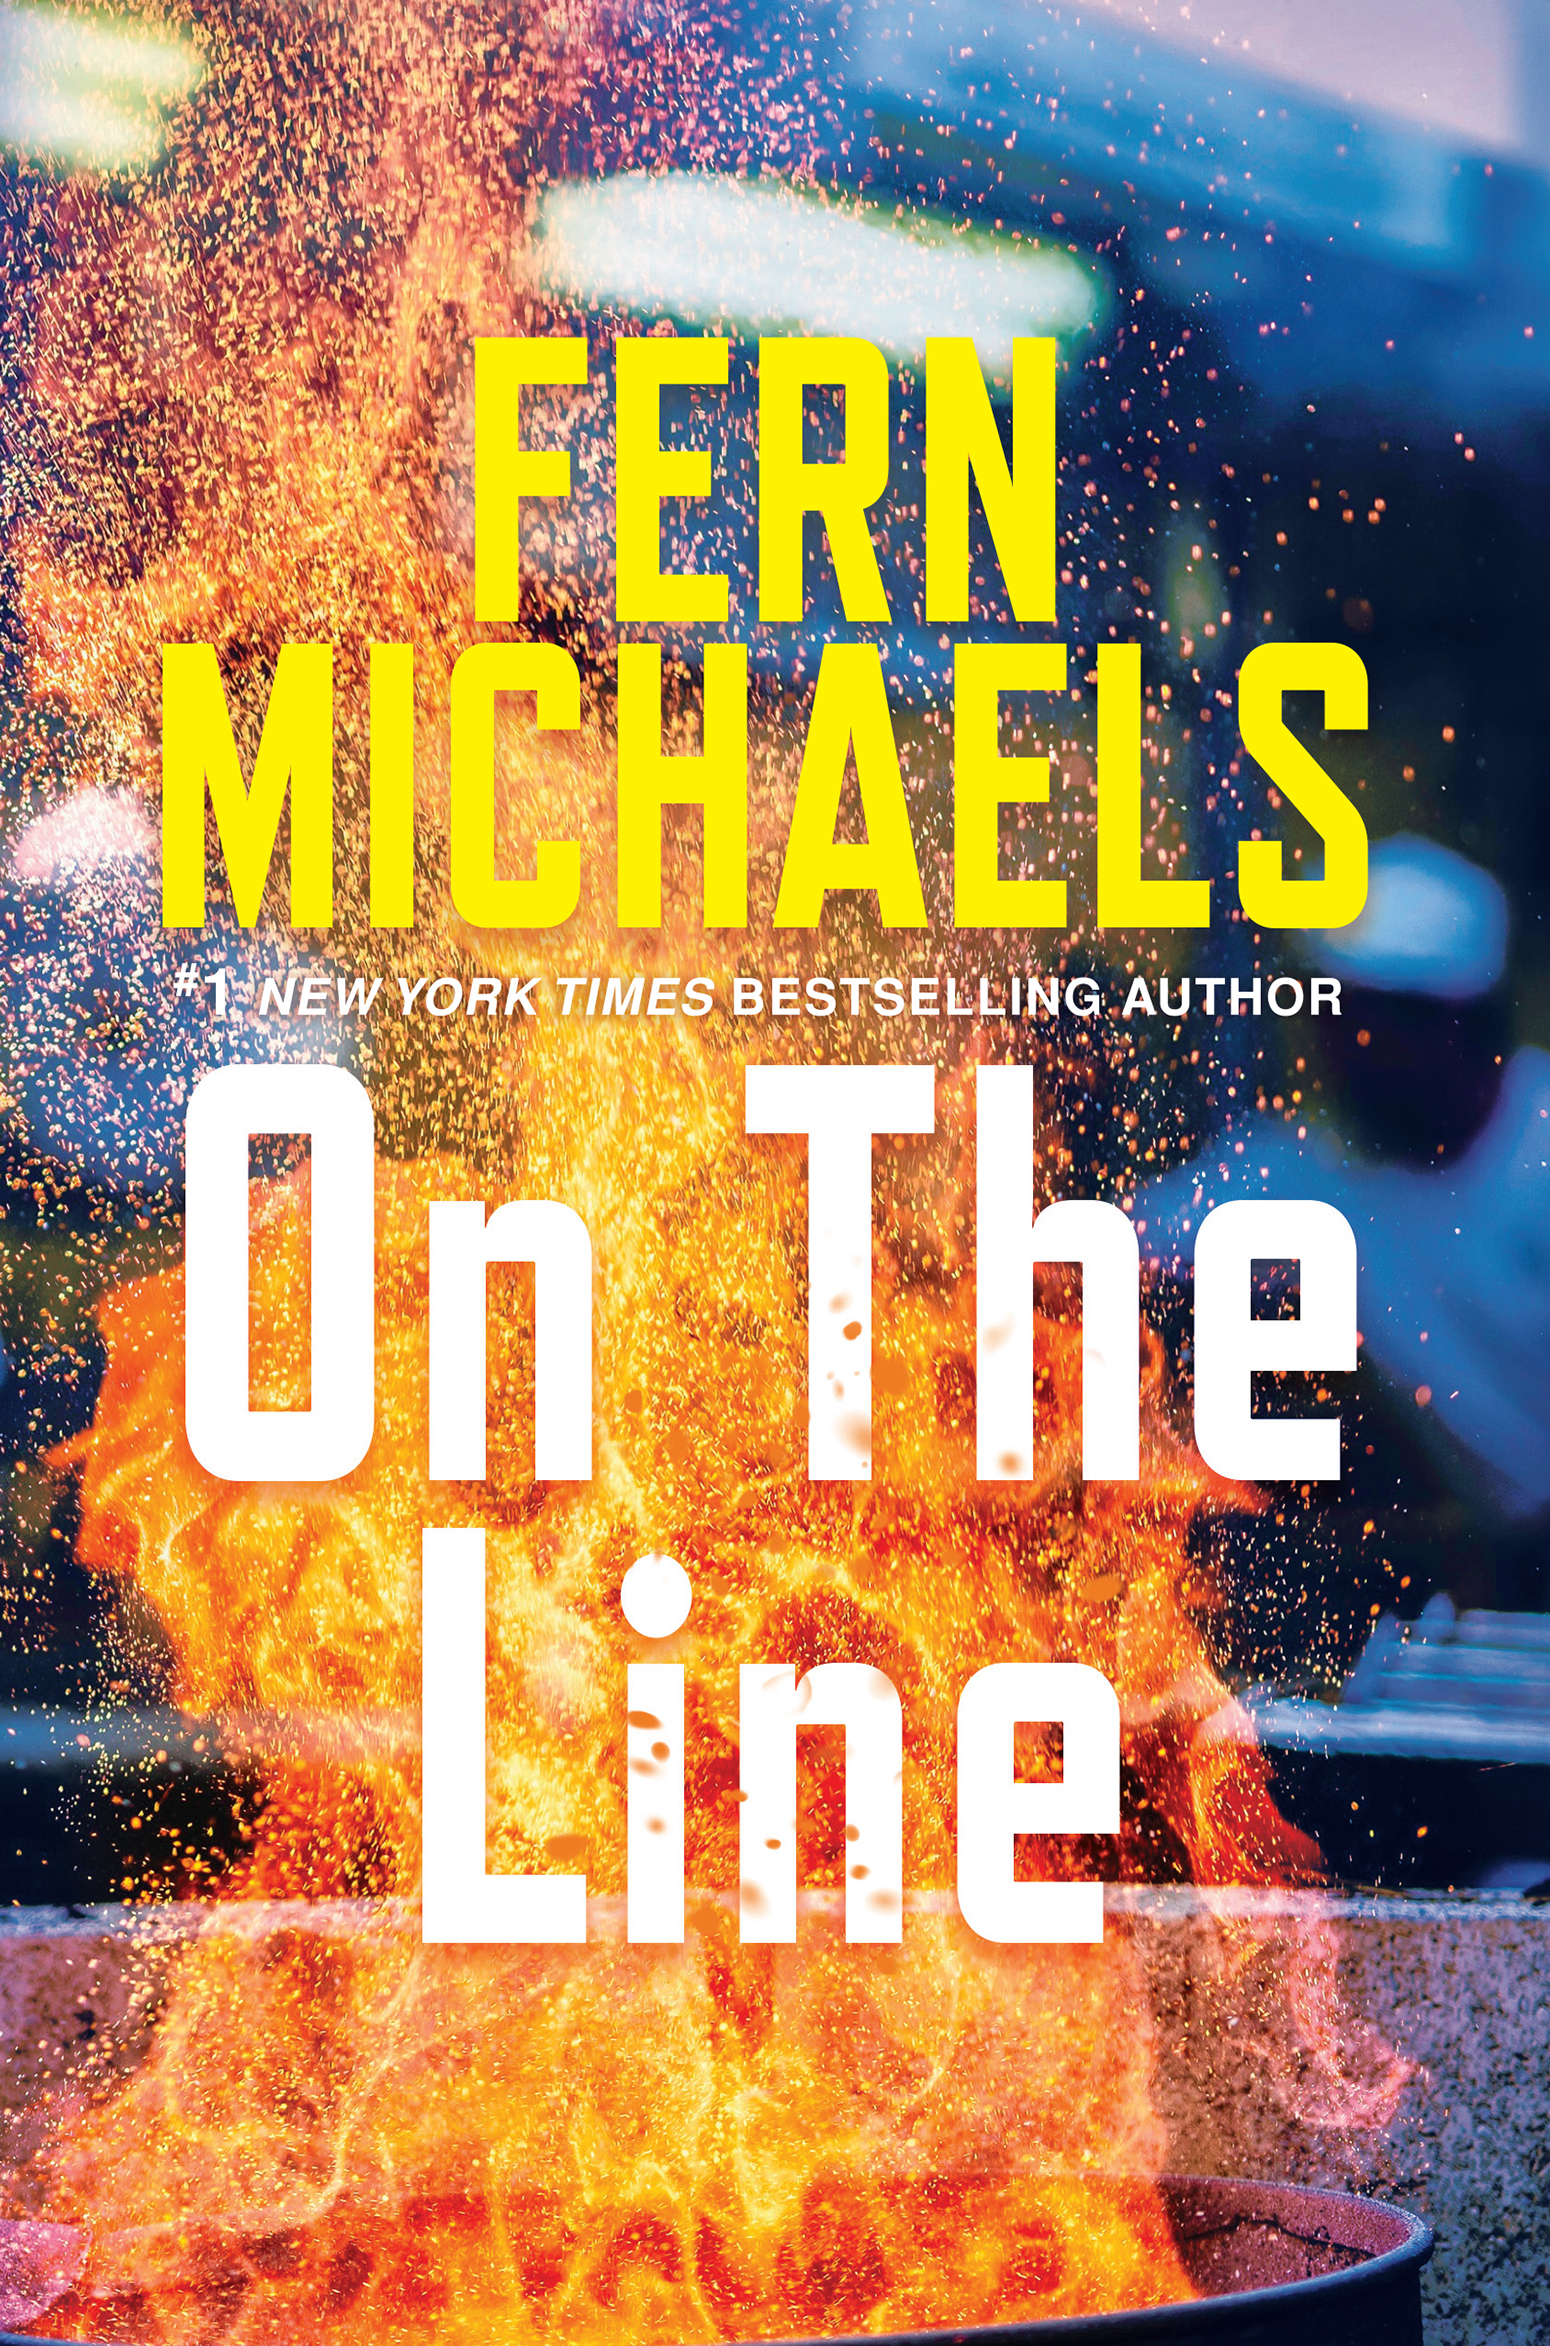 On the Line cover image